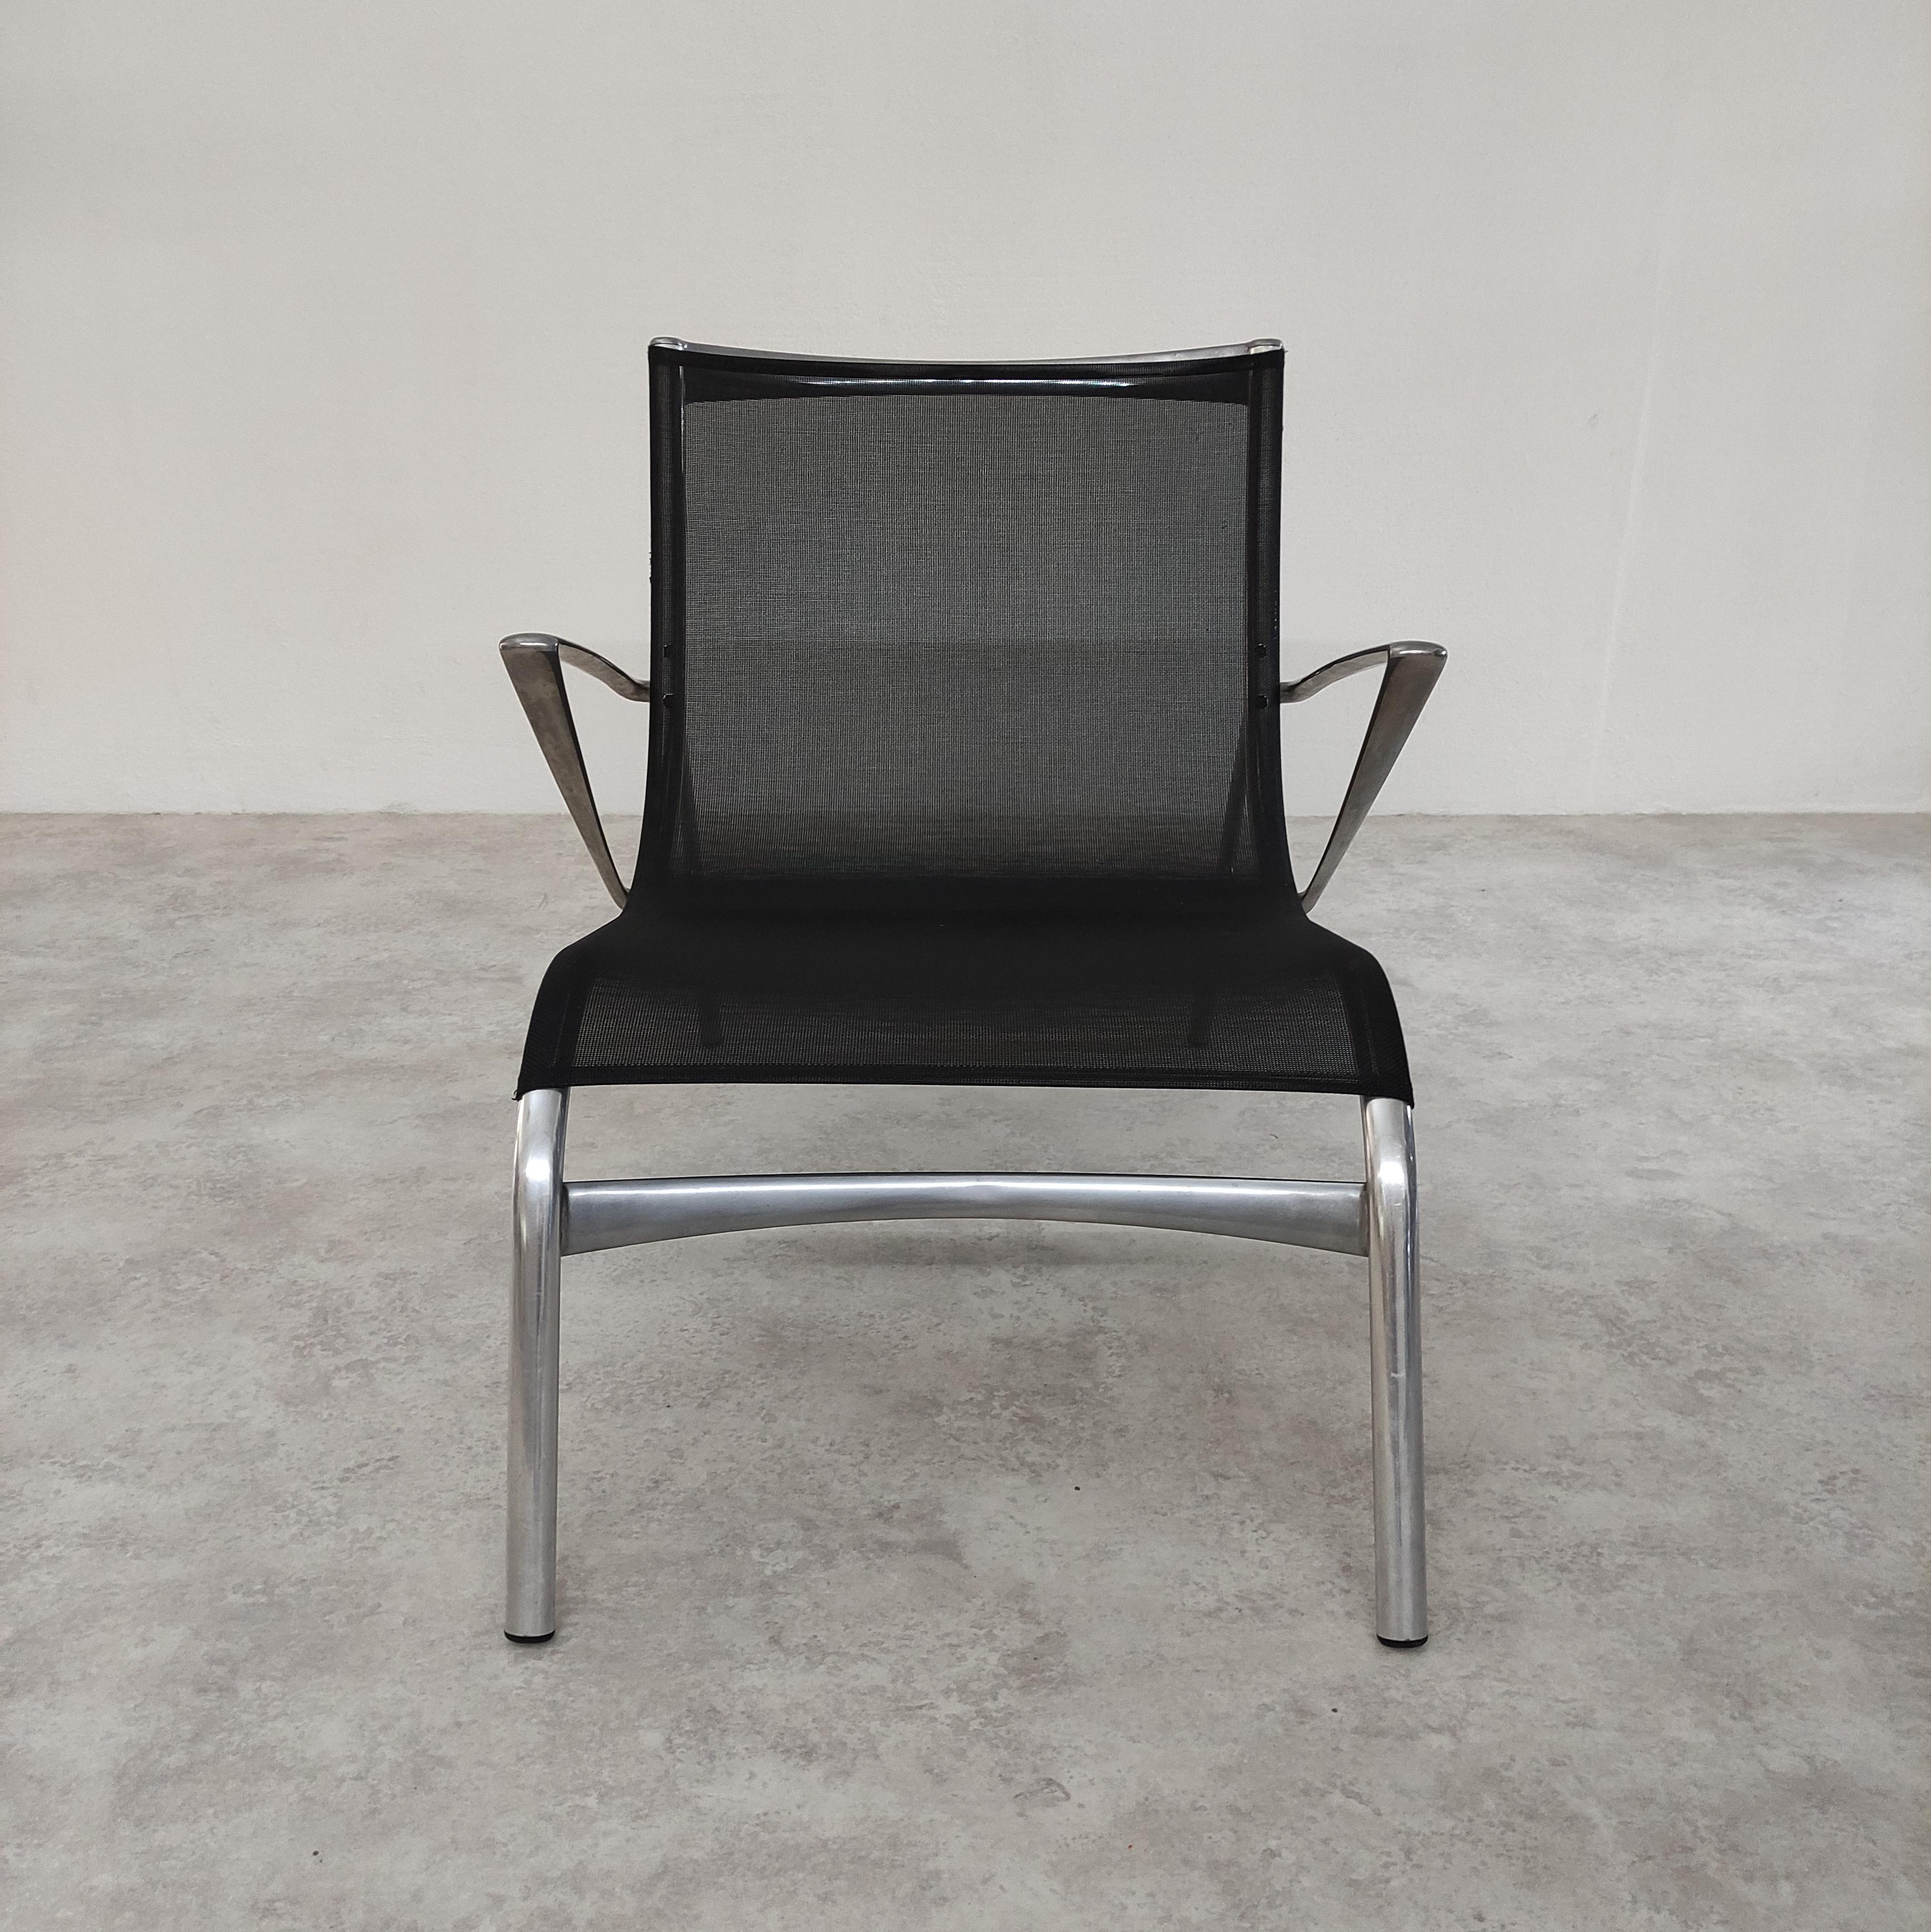 Lounge chair Alias Armframe 438, design by One of the most importantnew designer Alberto Meda.
Easy chair for outdoor or indoor, arms with structure made of extruded aluminium profile and die-cast aluminium elements; seat and back in fire retardant